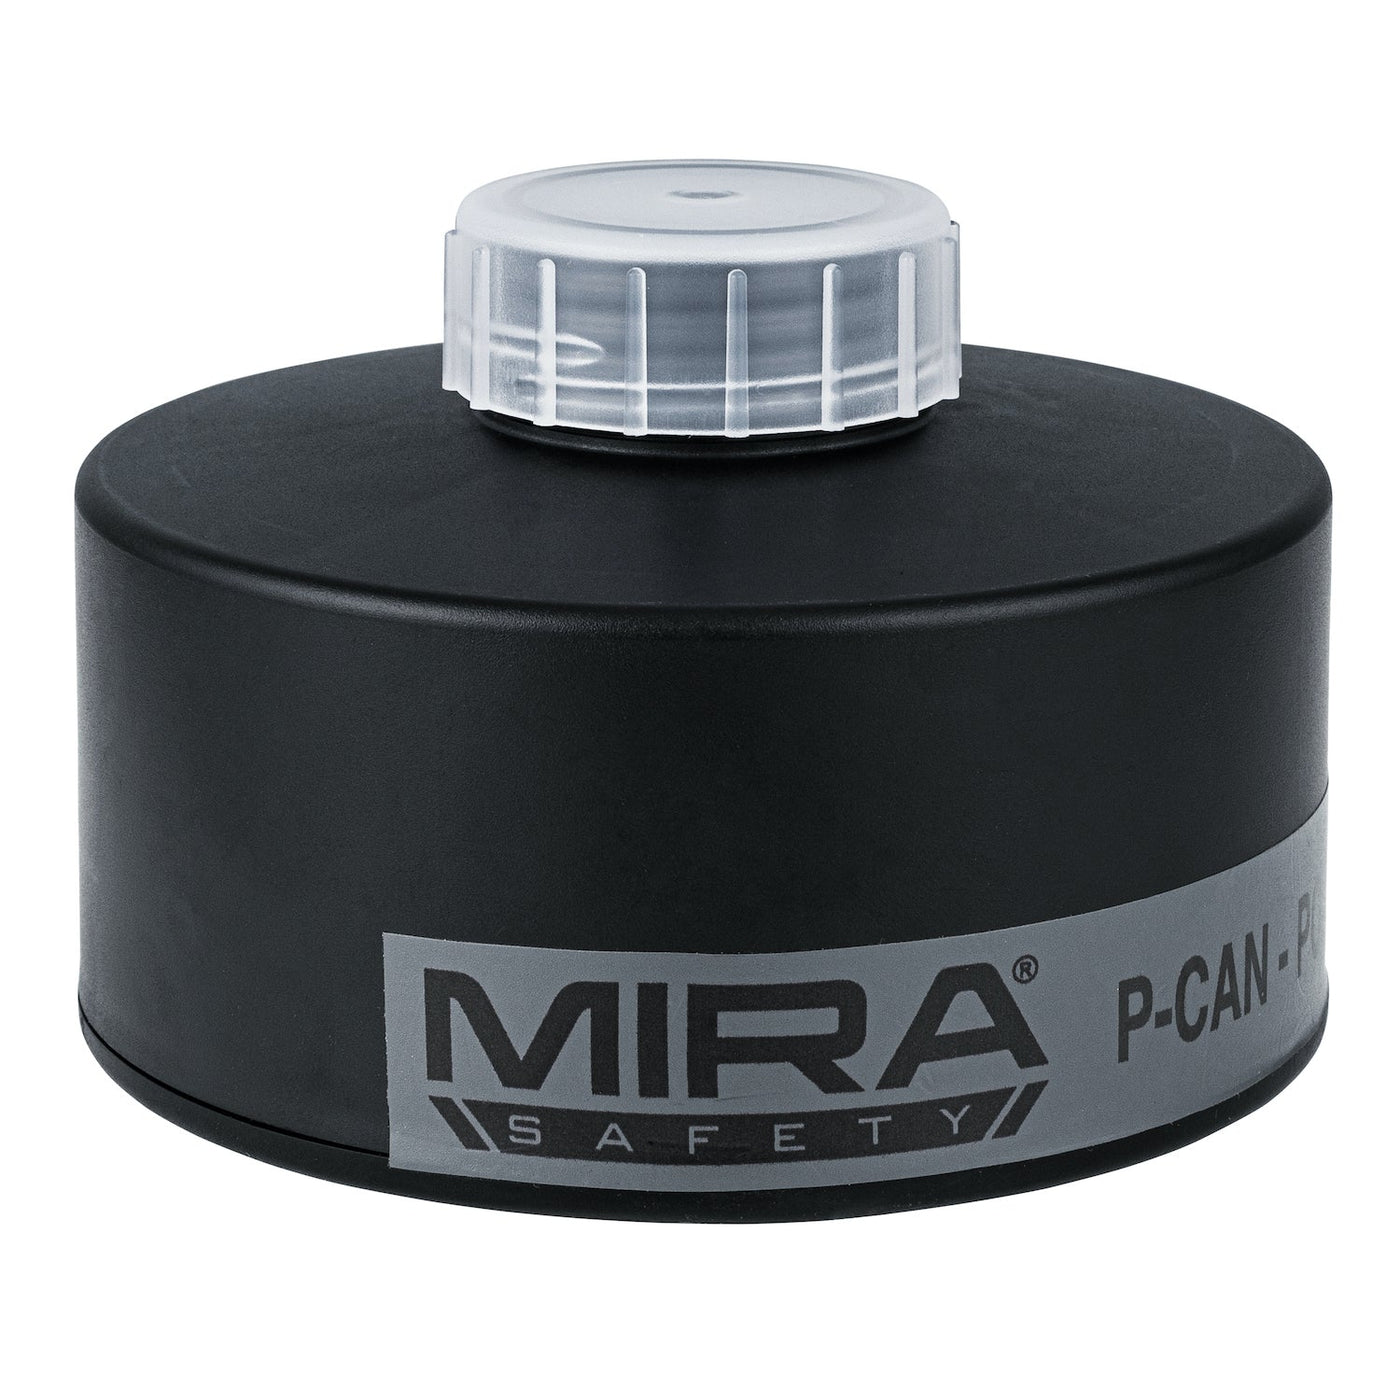 P-CAN Police Gas Mask Filter front view with MIRA Safety logo